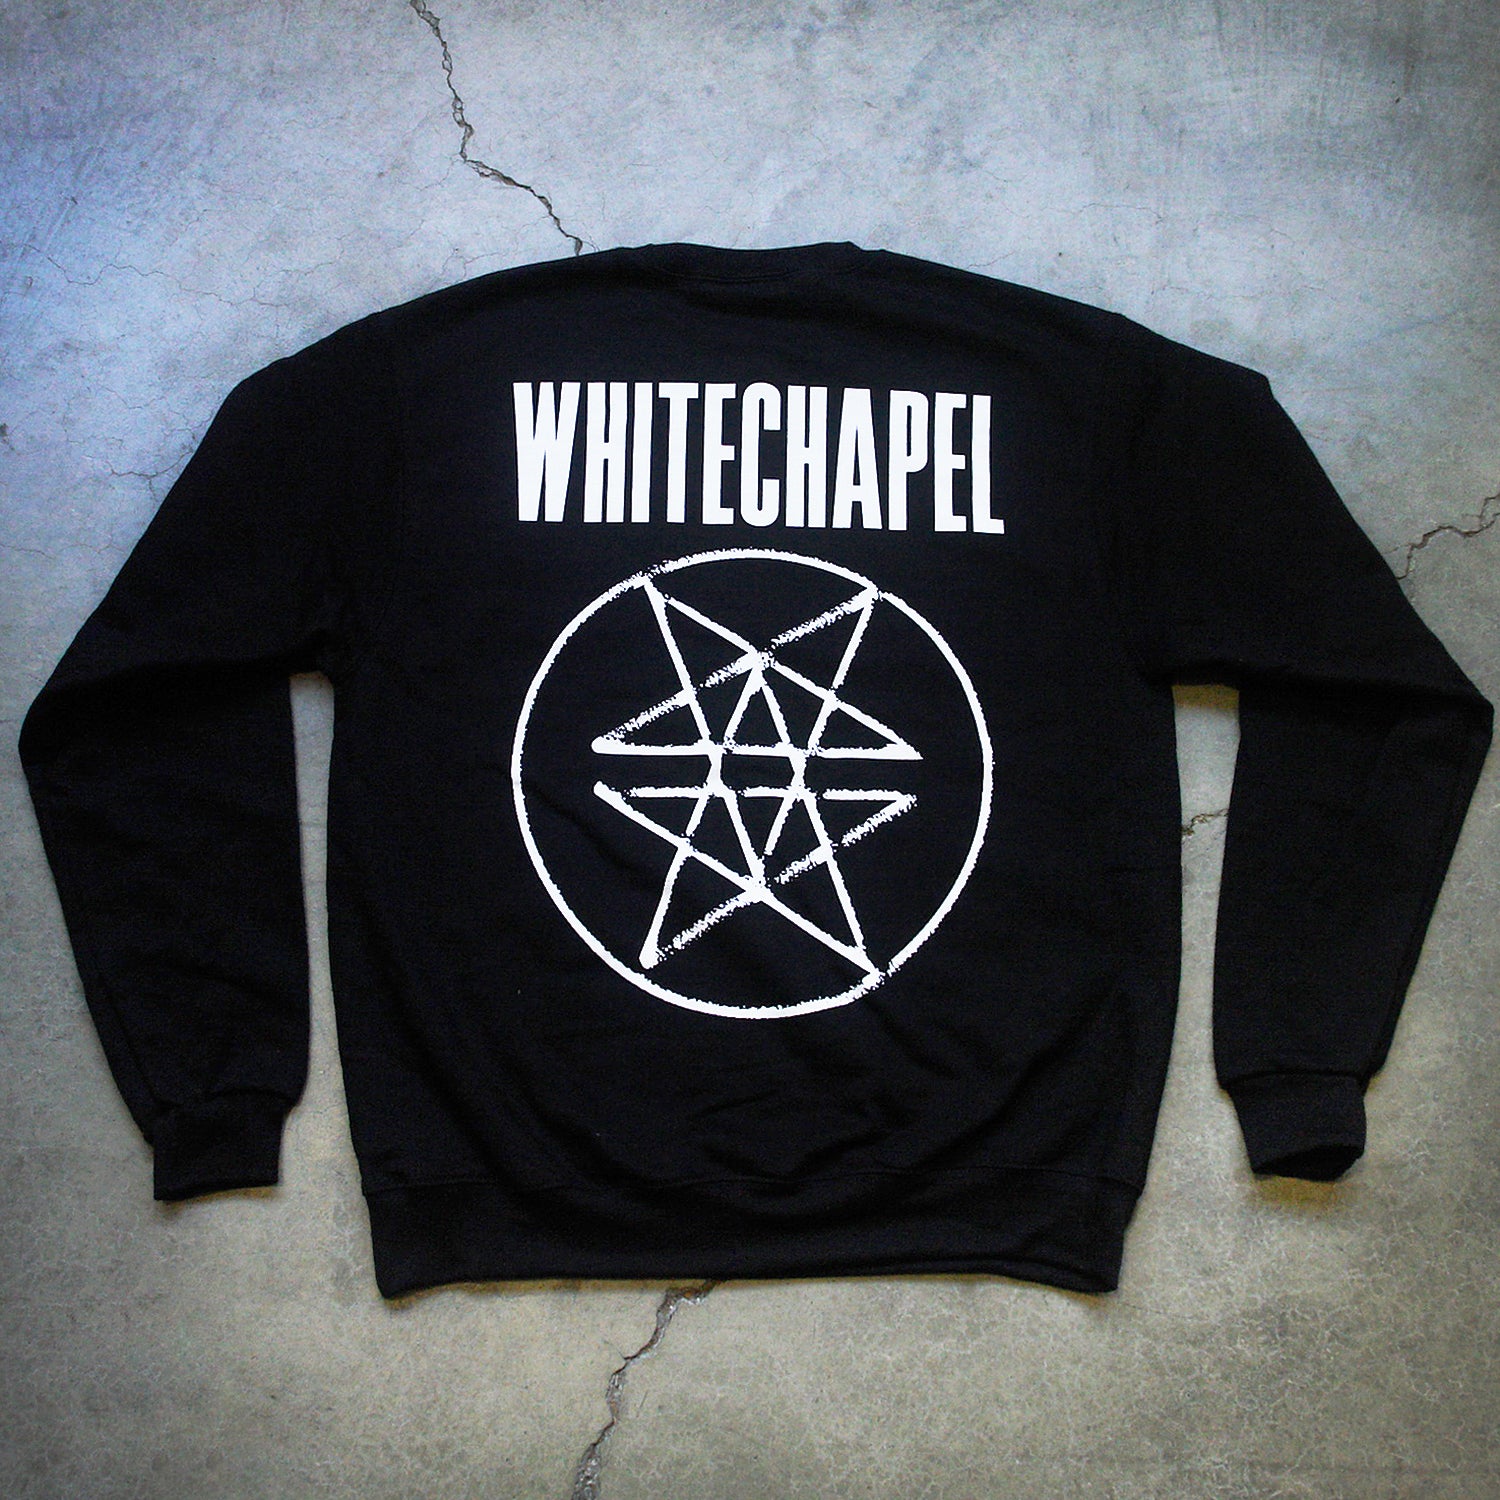 Image of the back of a black crewneck against a grey concrete background. Across the shoulder area of the crewneck in big white letters says "whitechapel". Below that is what is called a double pentagram, it is a white circle with two stars mirroring and slightly overlapping each other on the inside of the circle.